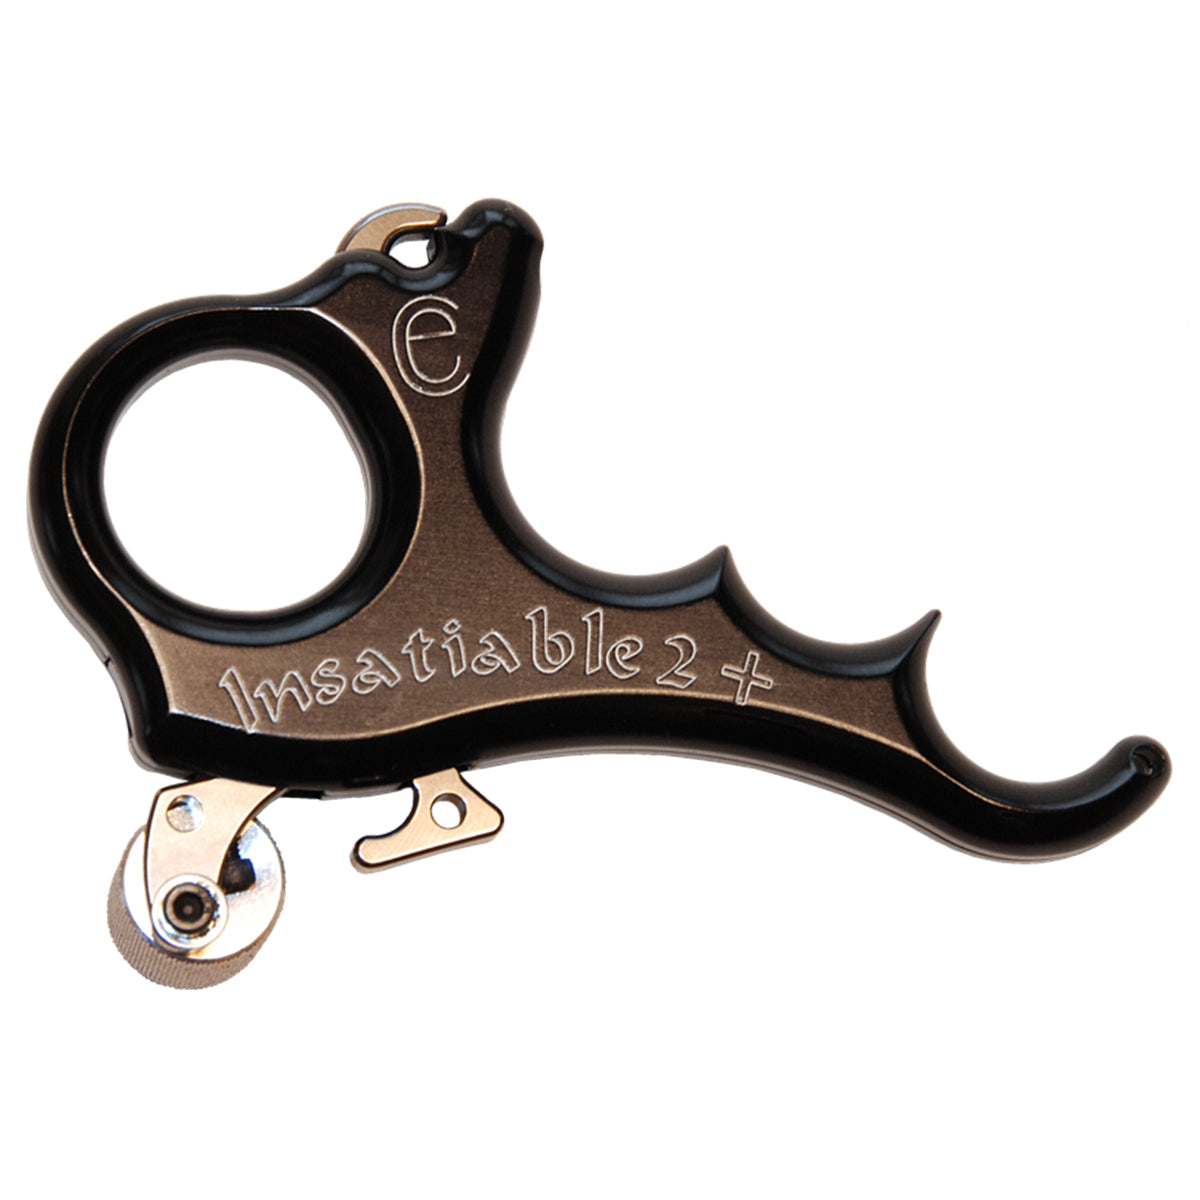 Carter Insatiable 2 Release by Carter Releases | Archery - goHUNT Shop